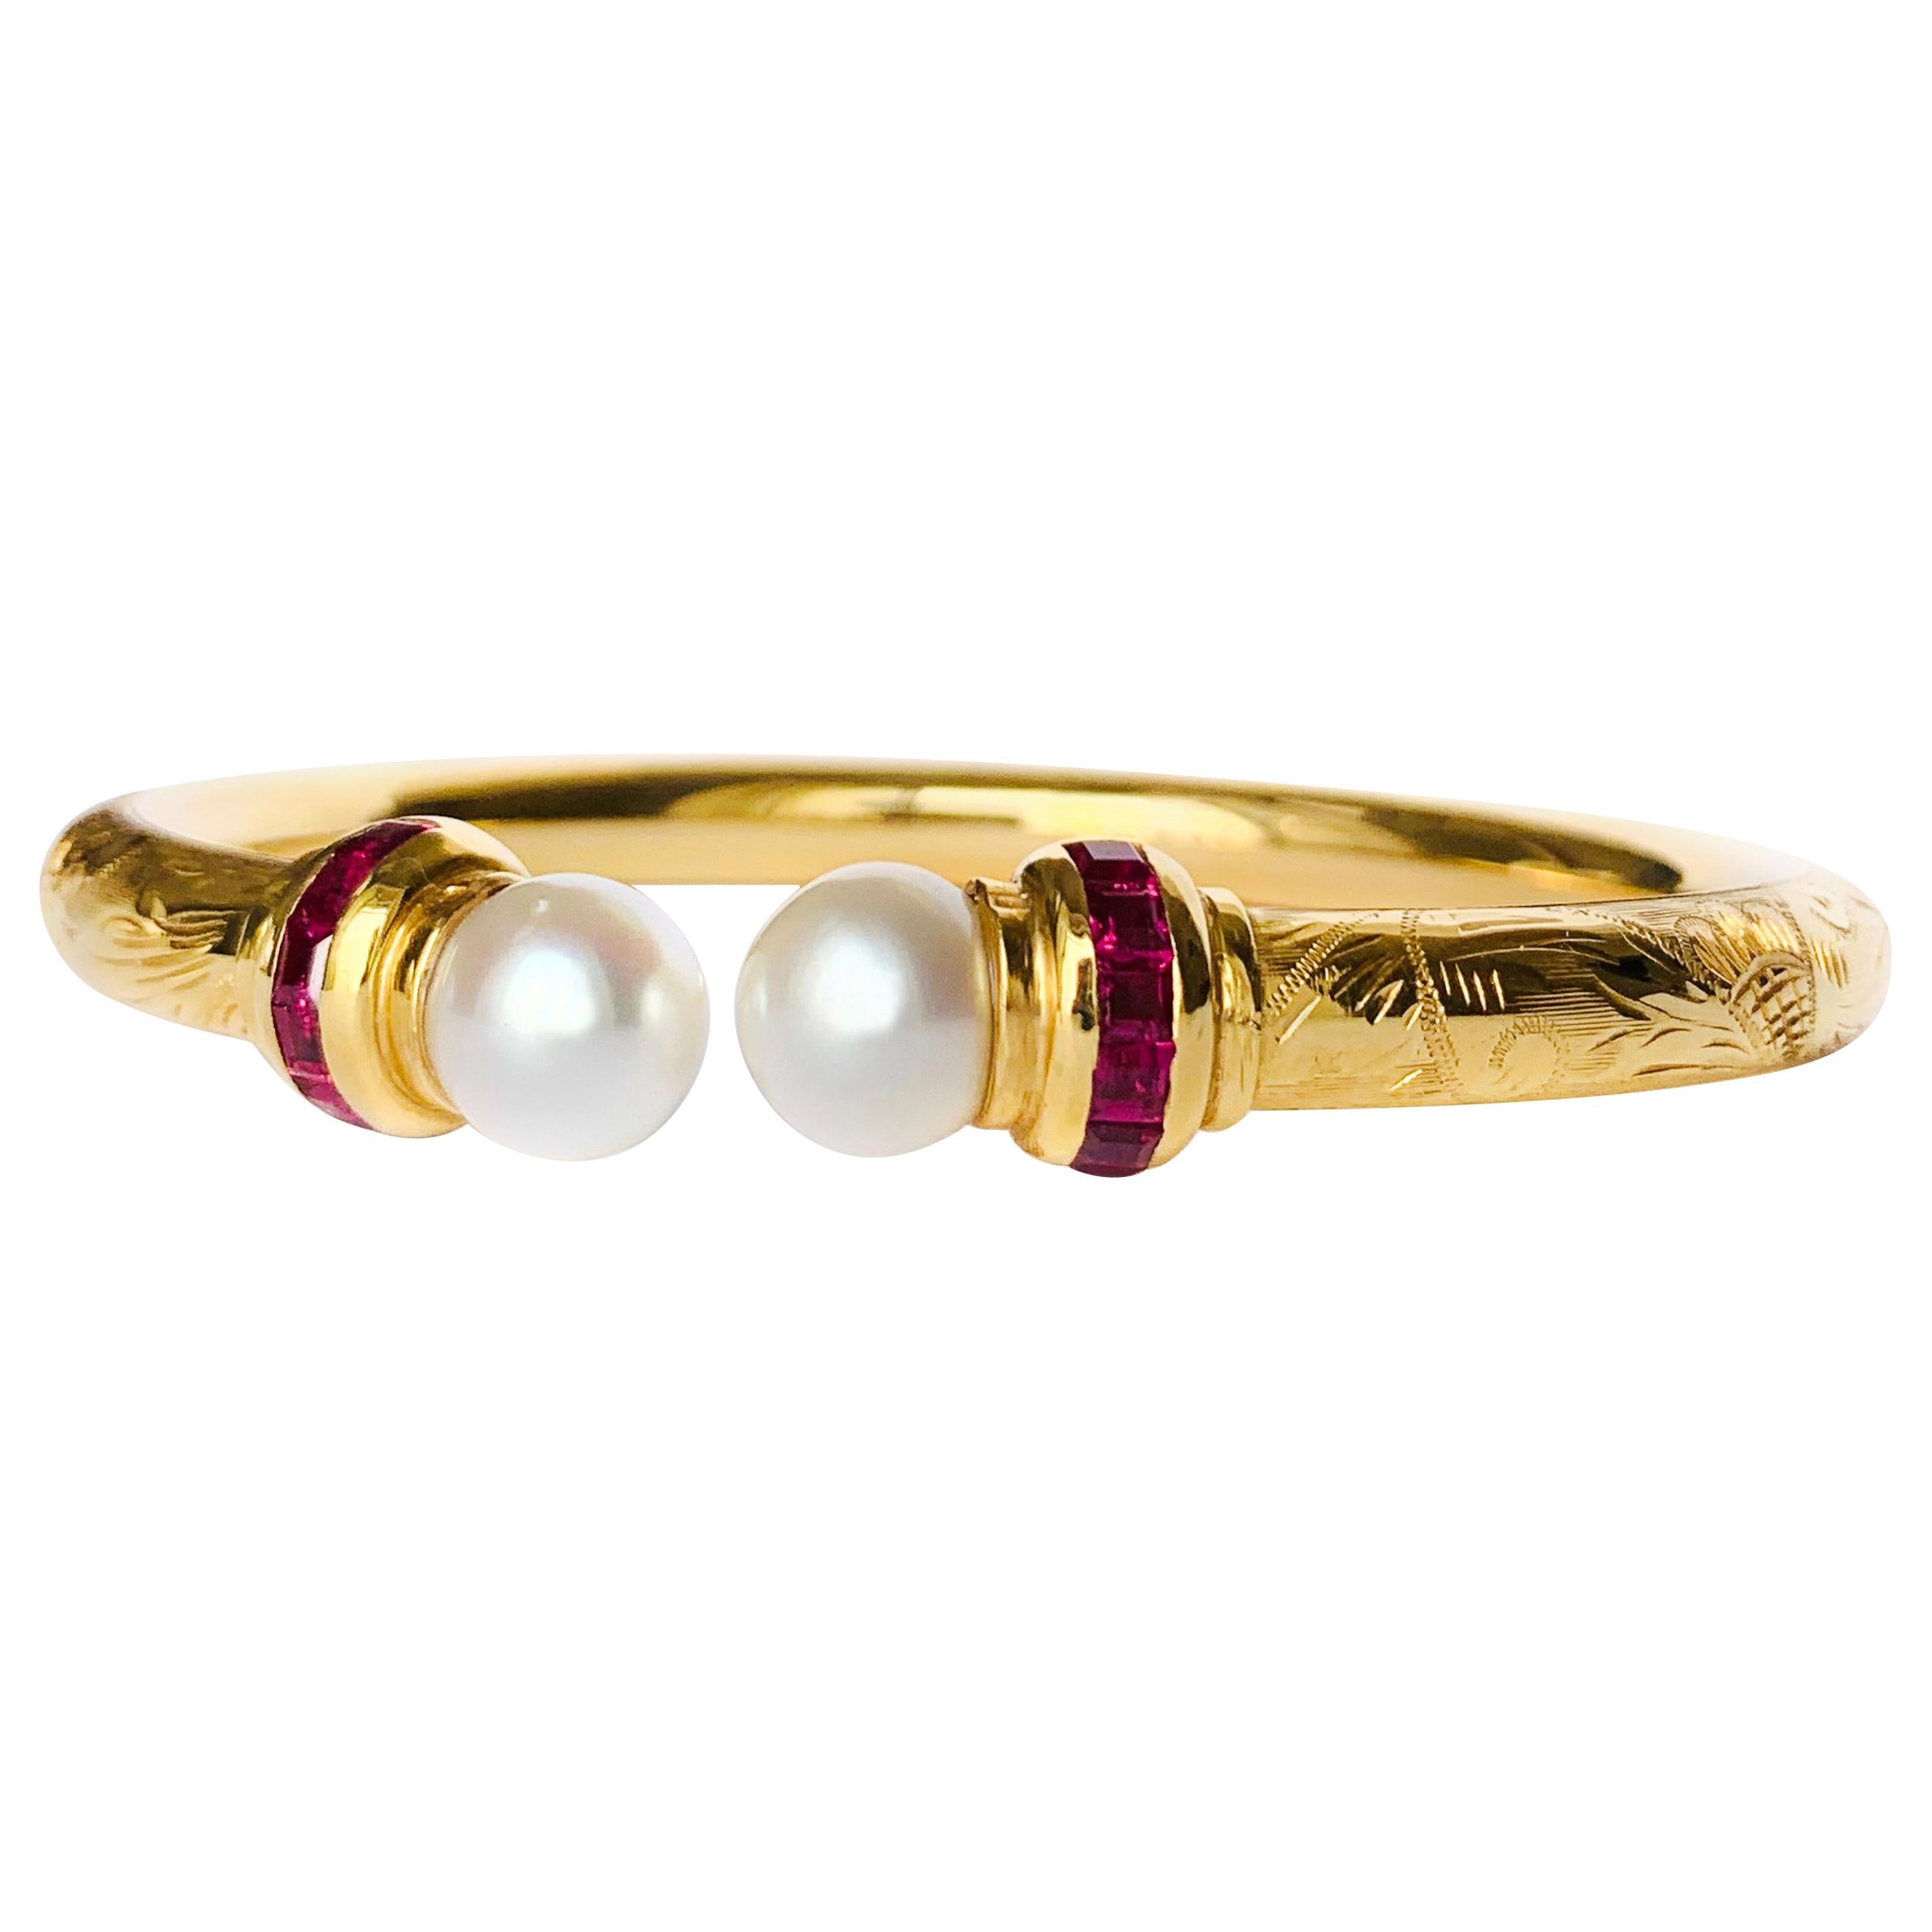 Hand Engraved Yellow Gold Open Bangle Bracelet with Pearls and Rubis